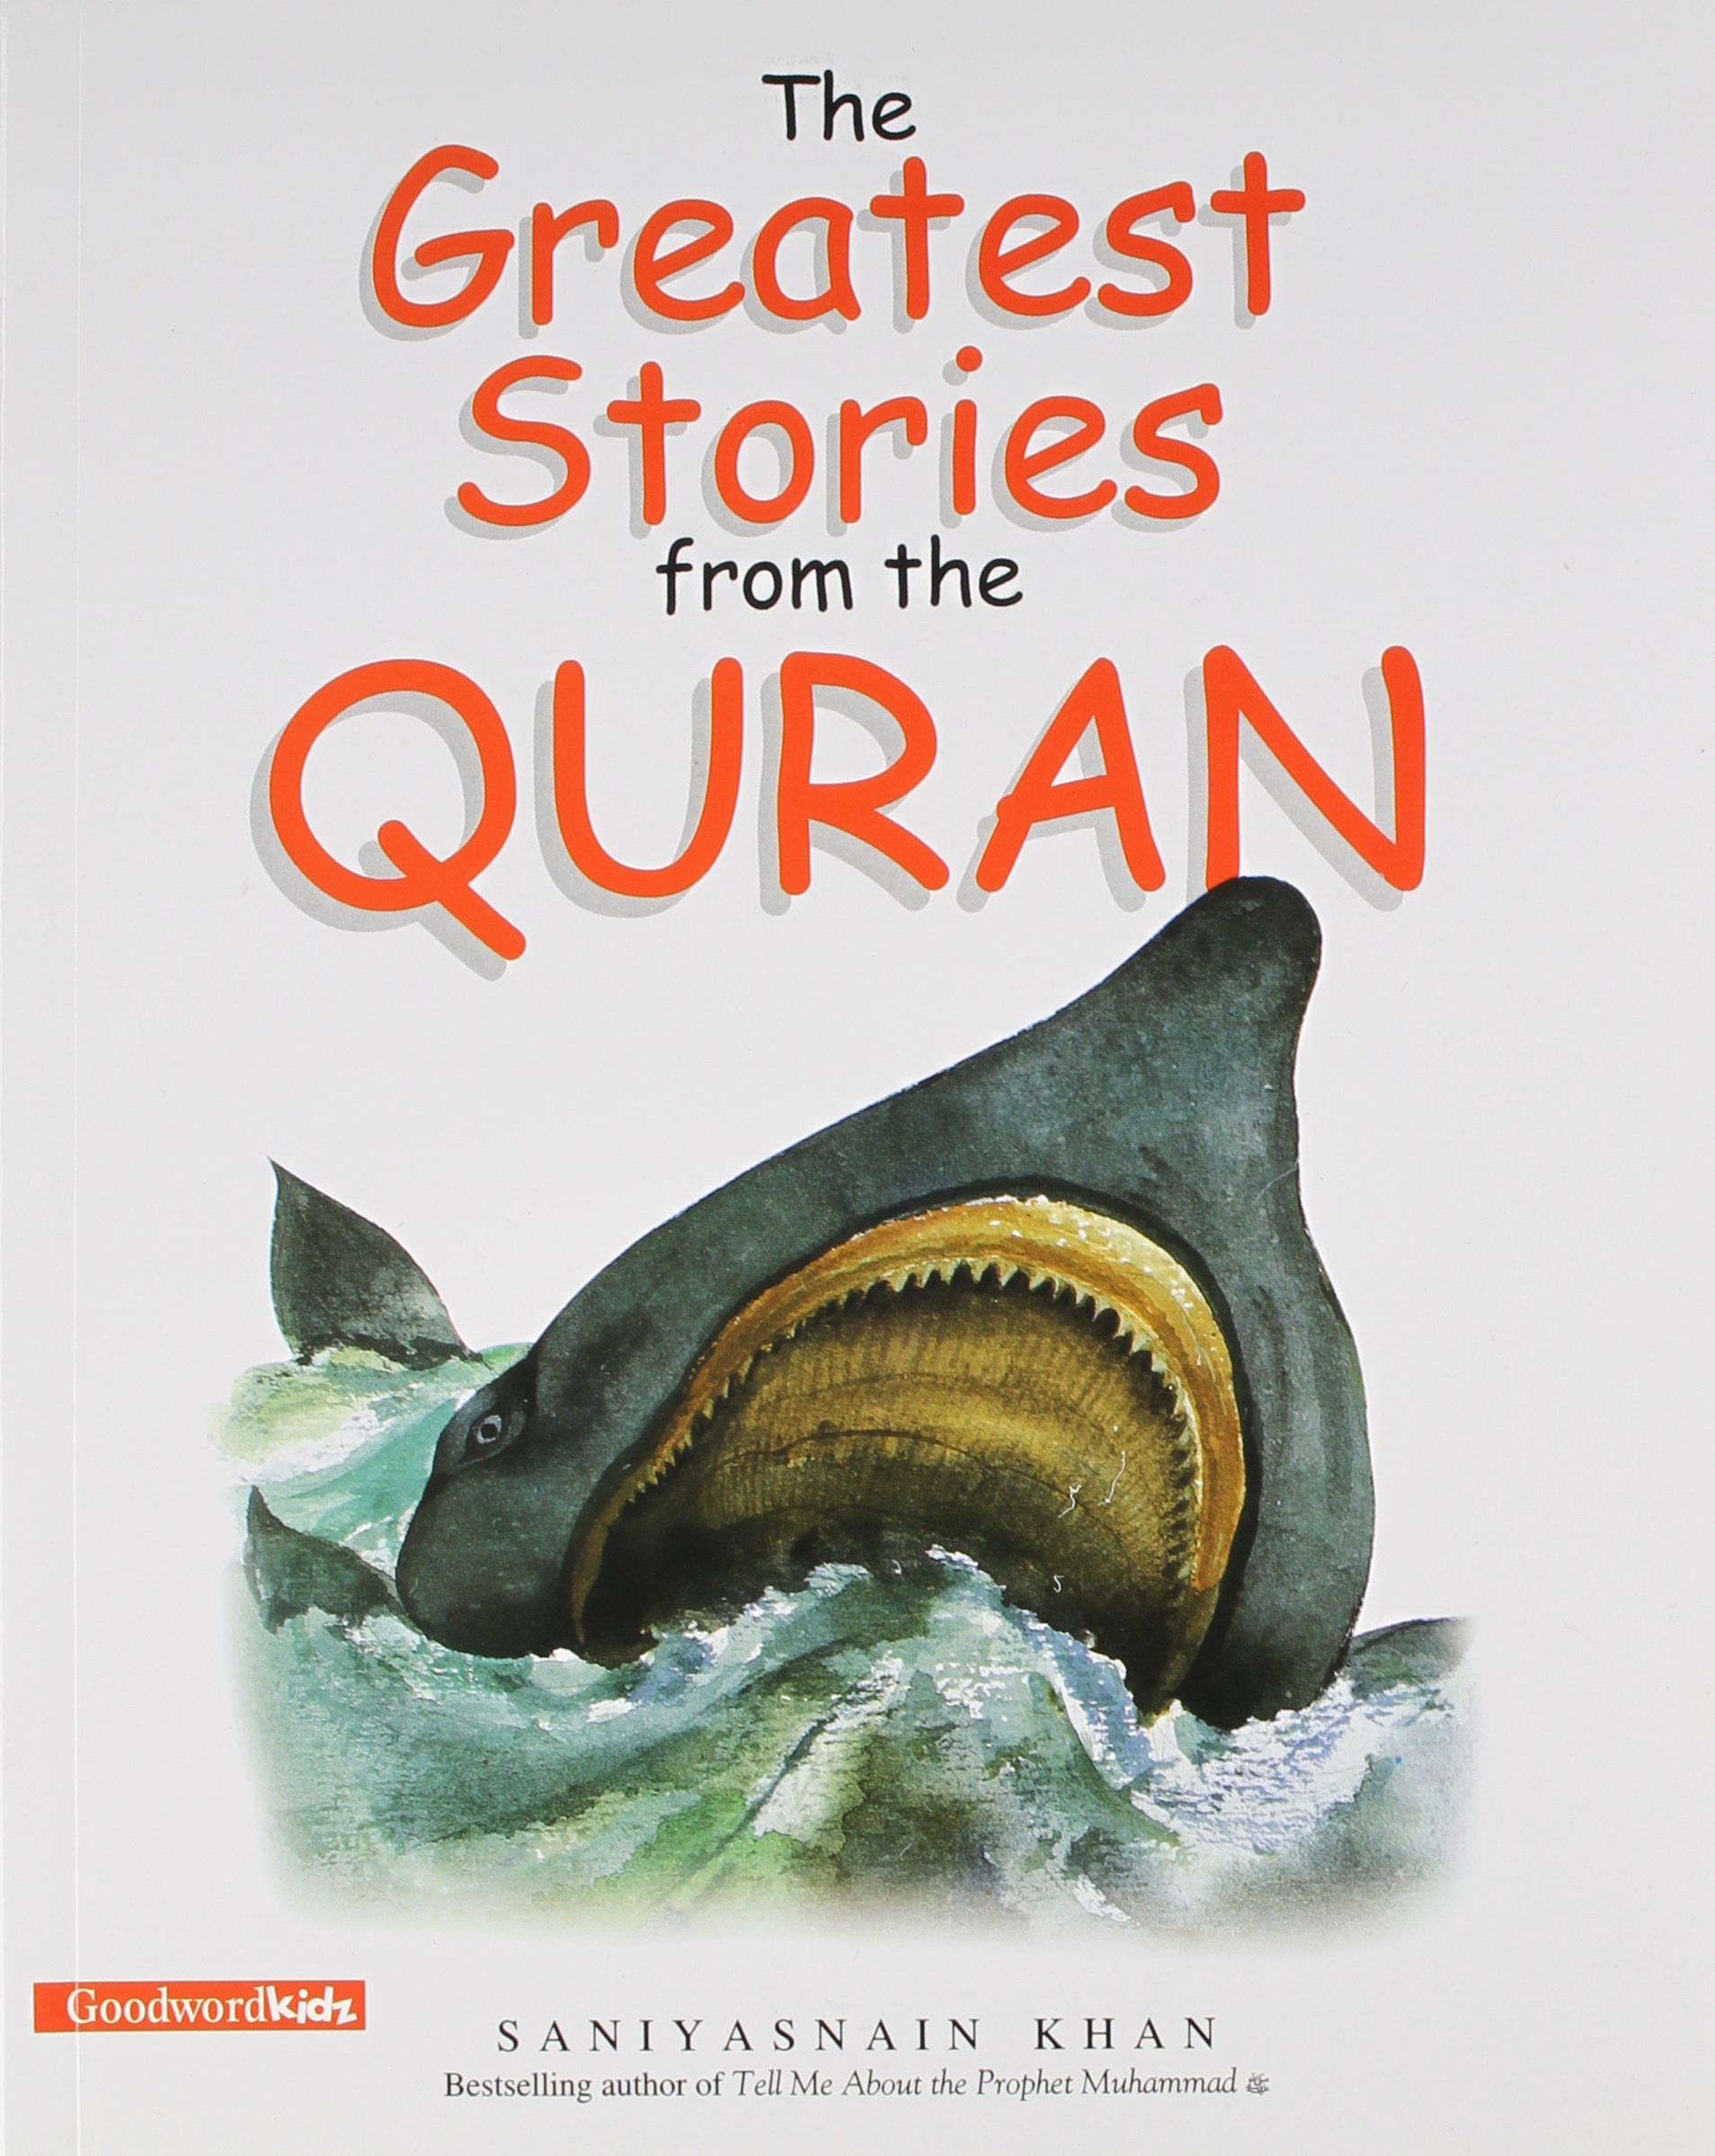 Greatest Stories from the Quran by Saniyasnain Khan